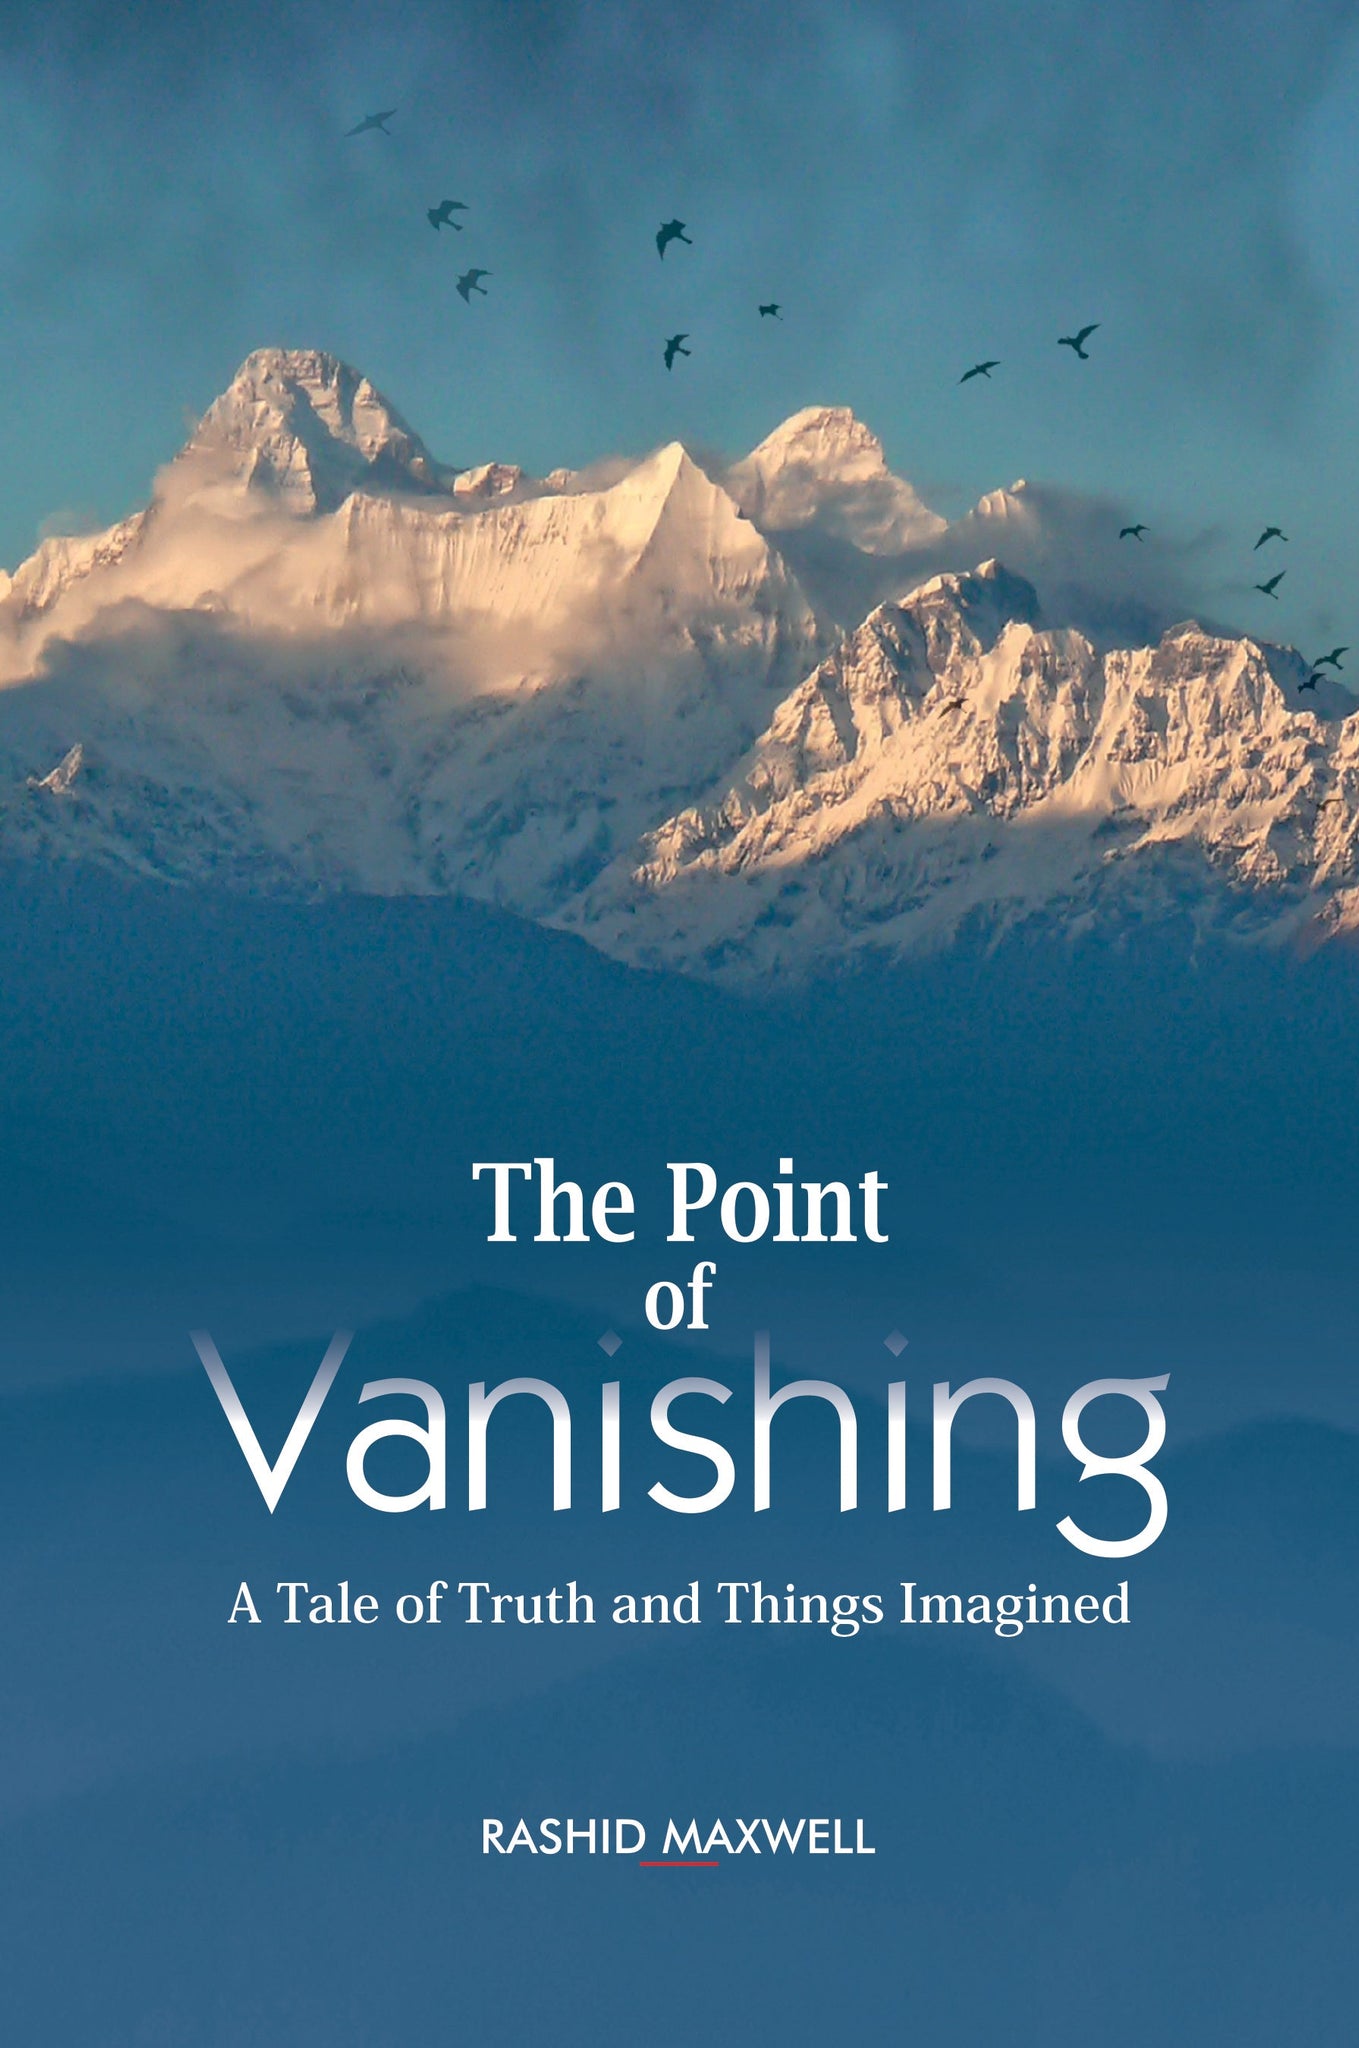 The Point of Vanishing: A Tale of Truth and Things Imagined